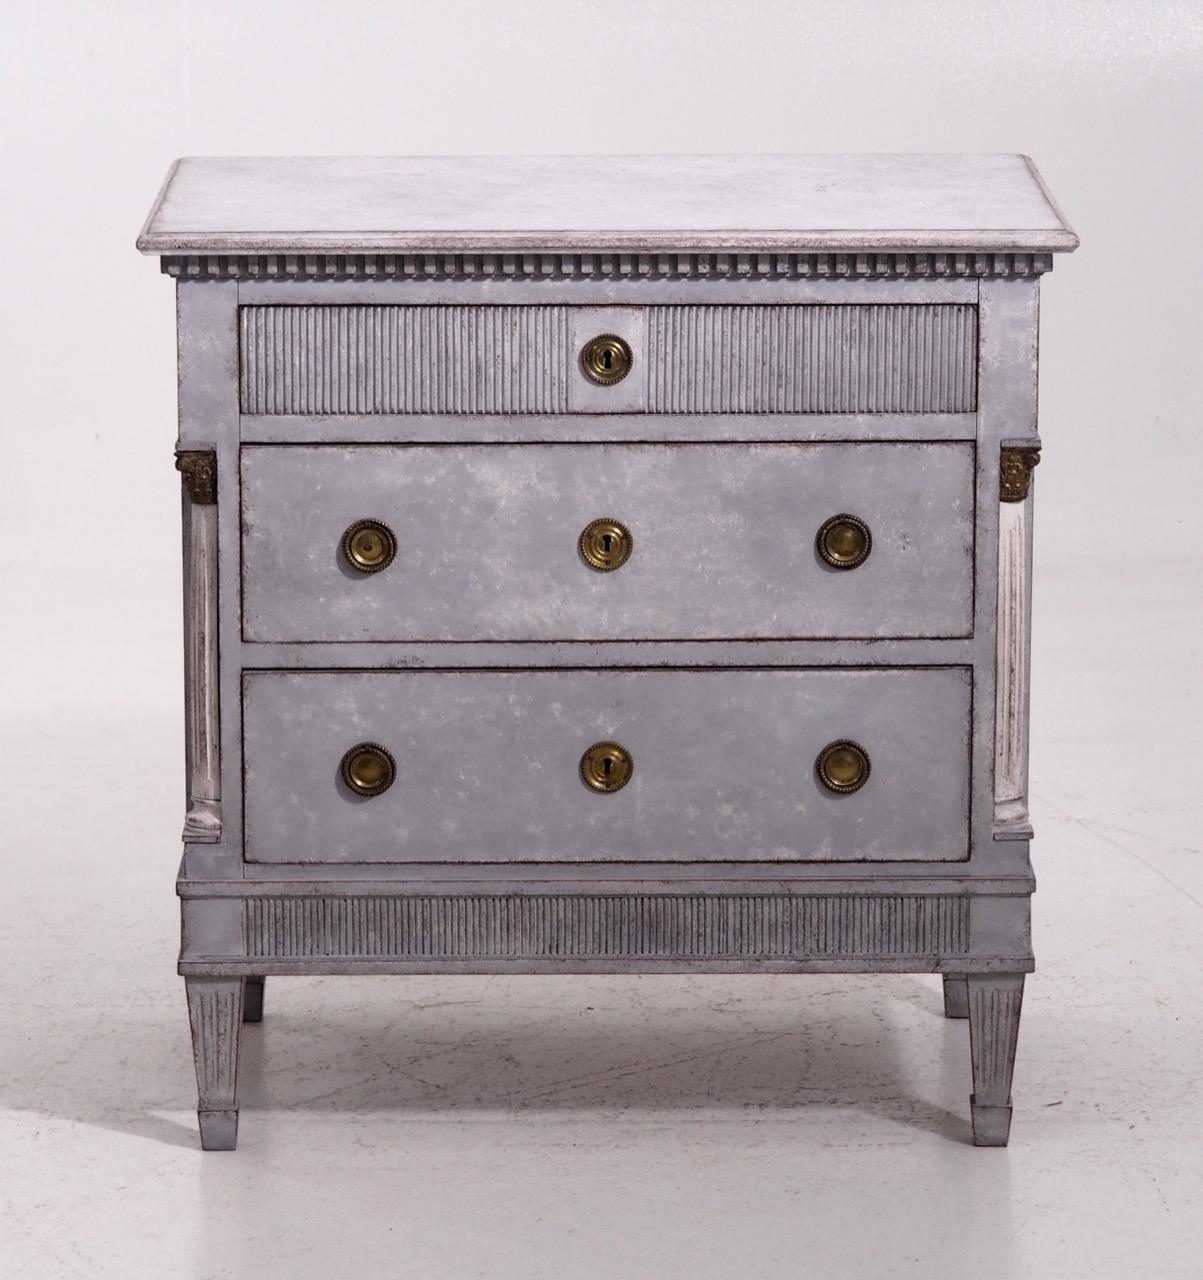 Gustavian style chest with carved columns and bronze mountings. Finely carved drawers, with key original locks, late 19th century.